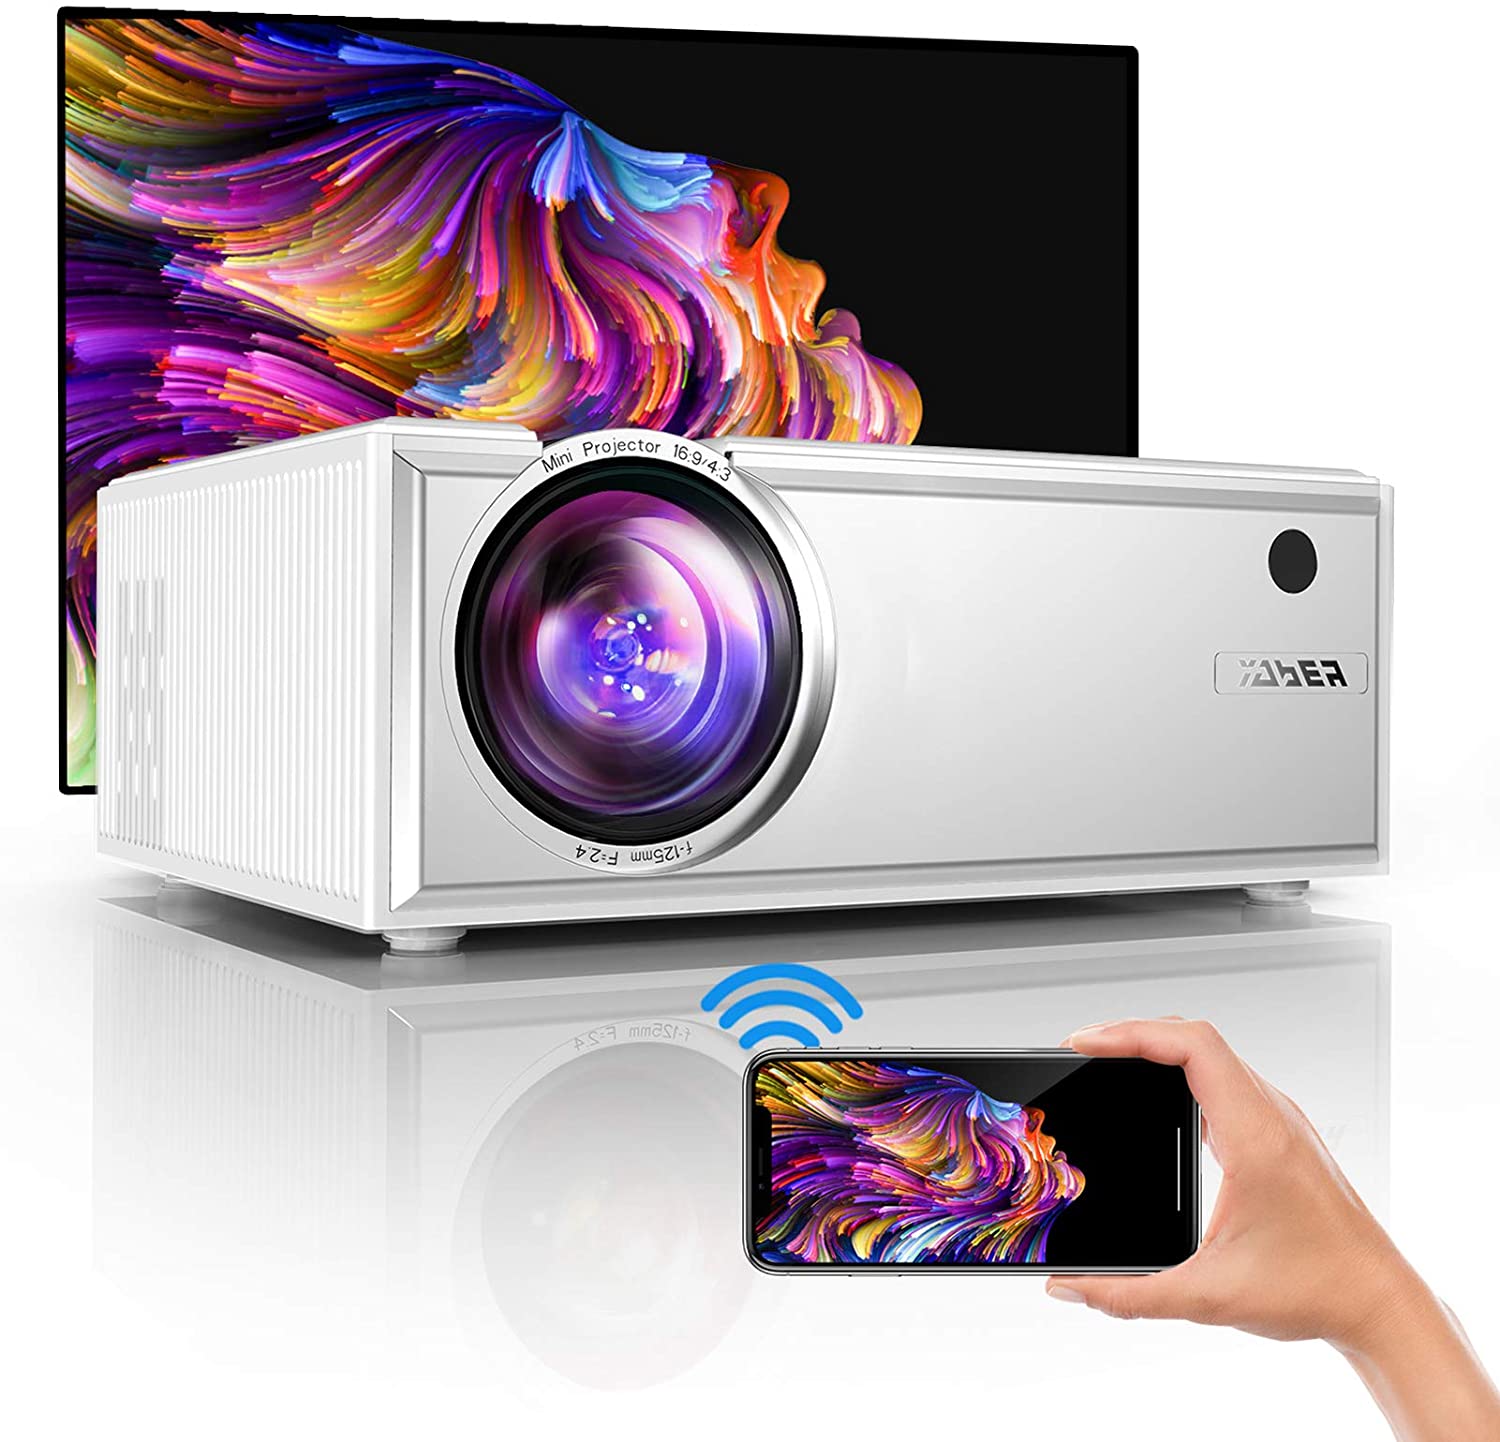 YABER Y61 WiFi Mini Projector (Best Budget Projector for Outdoor Movies in 2022)